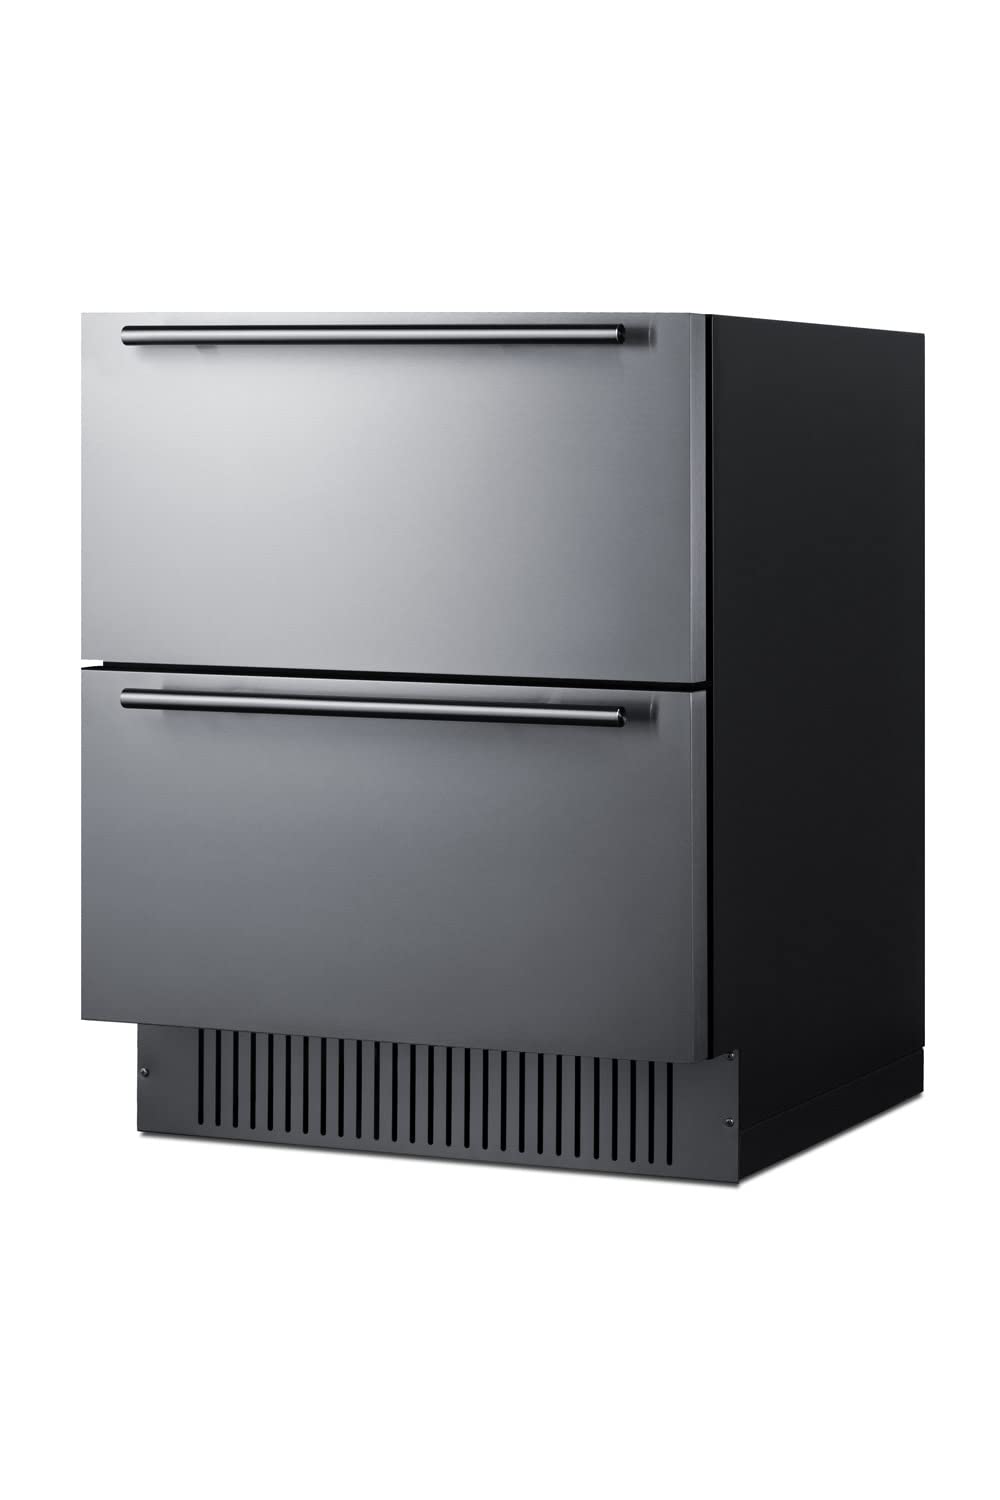 Summit Appliance SPR275OS2D 27" Wide 2-Drawer All-Refrigerator, 4.83 cu.ft; Stainless Steel Drawers; Wweatherproof; Frost-free; LED Lighting; Digital Thermostat; Drawer Dividers